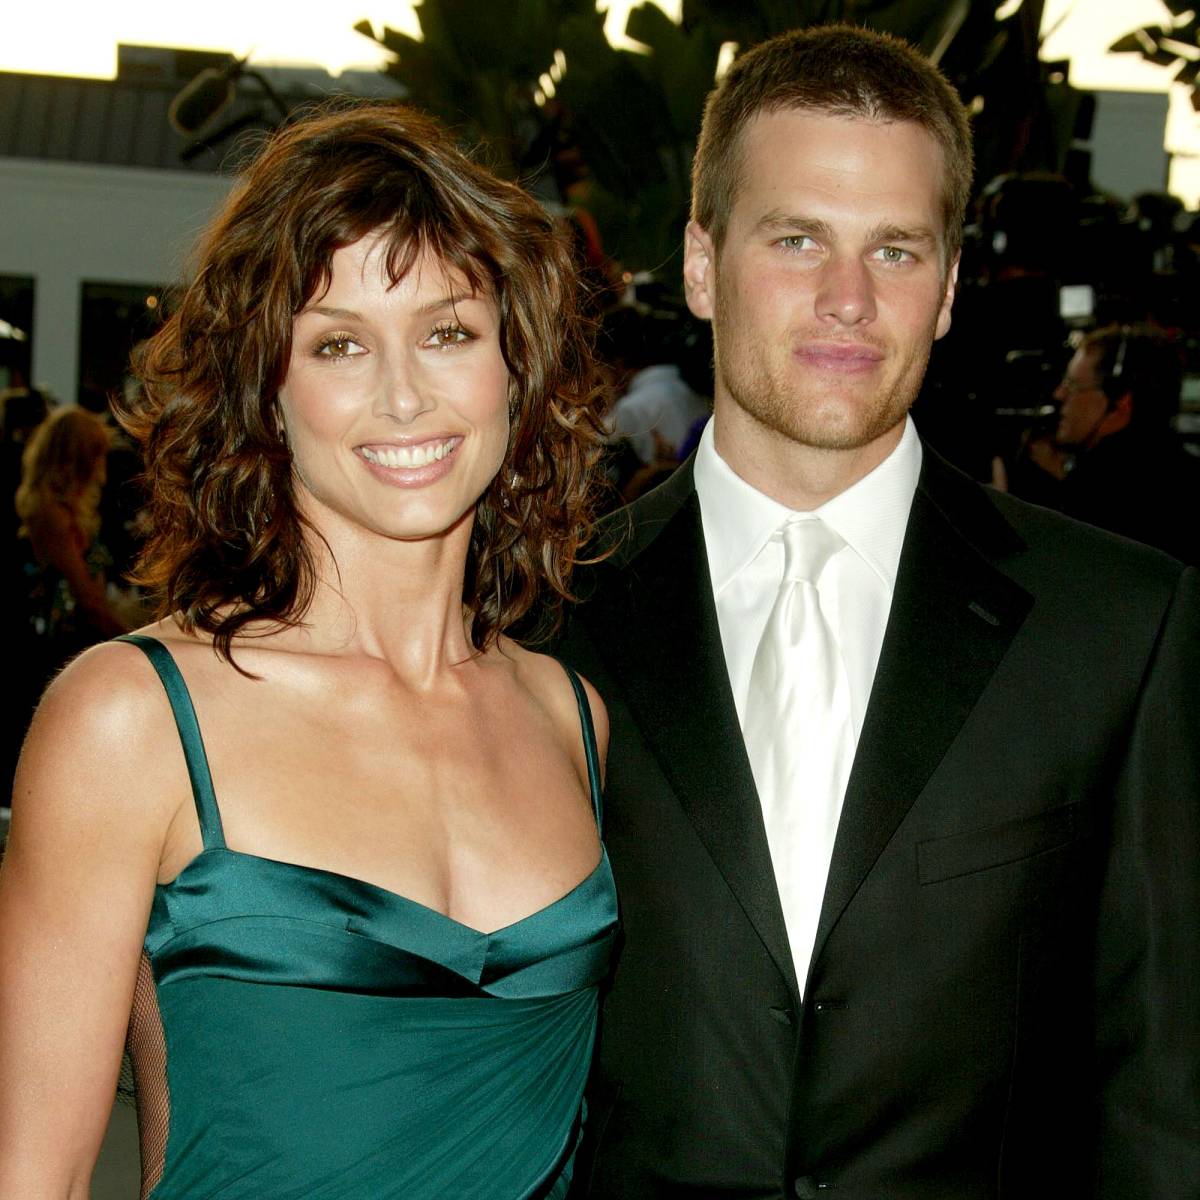 Bridget Moynahans Quotes About Her Relationship With Ex Tom Brady Us Weekly 5100